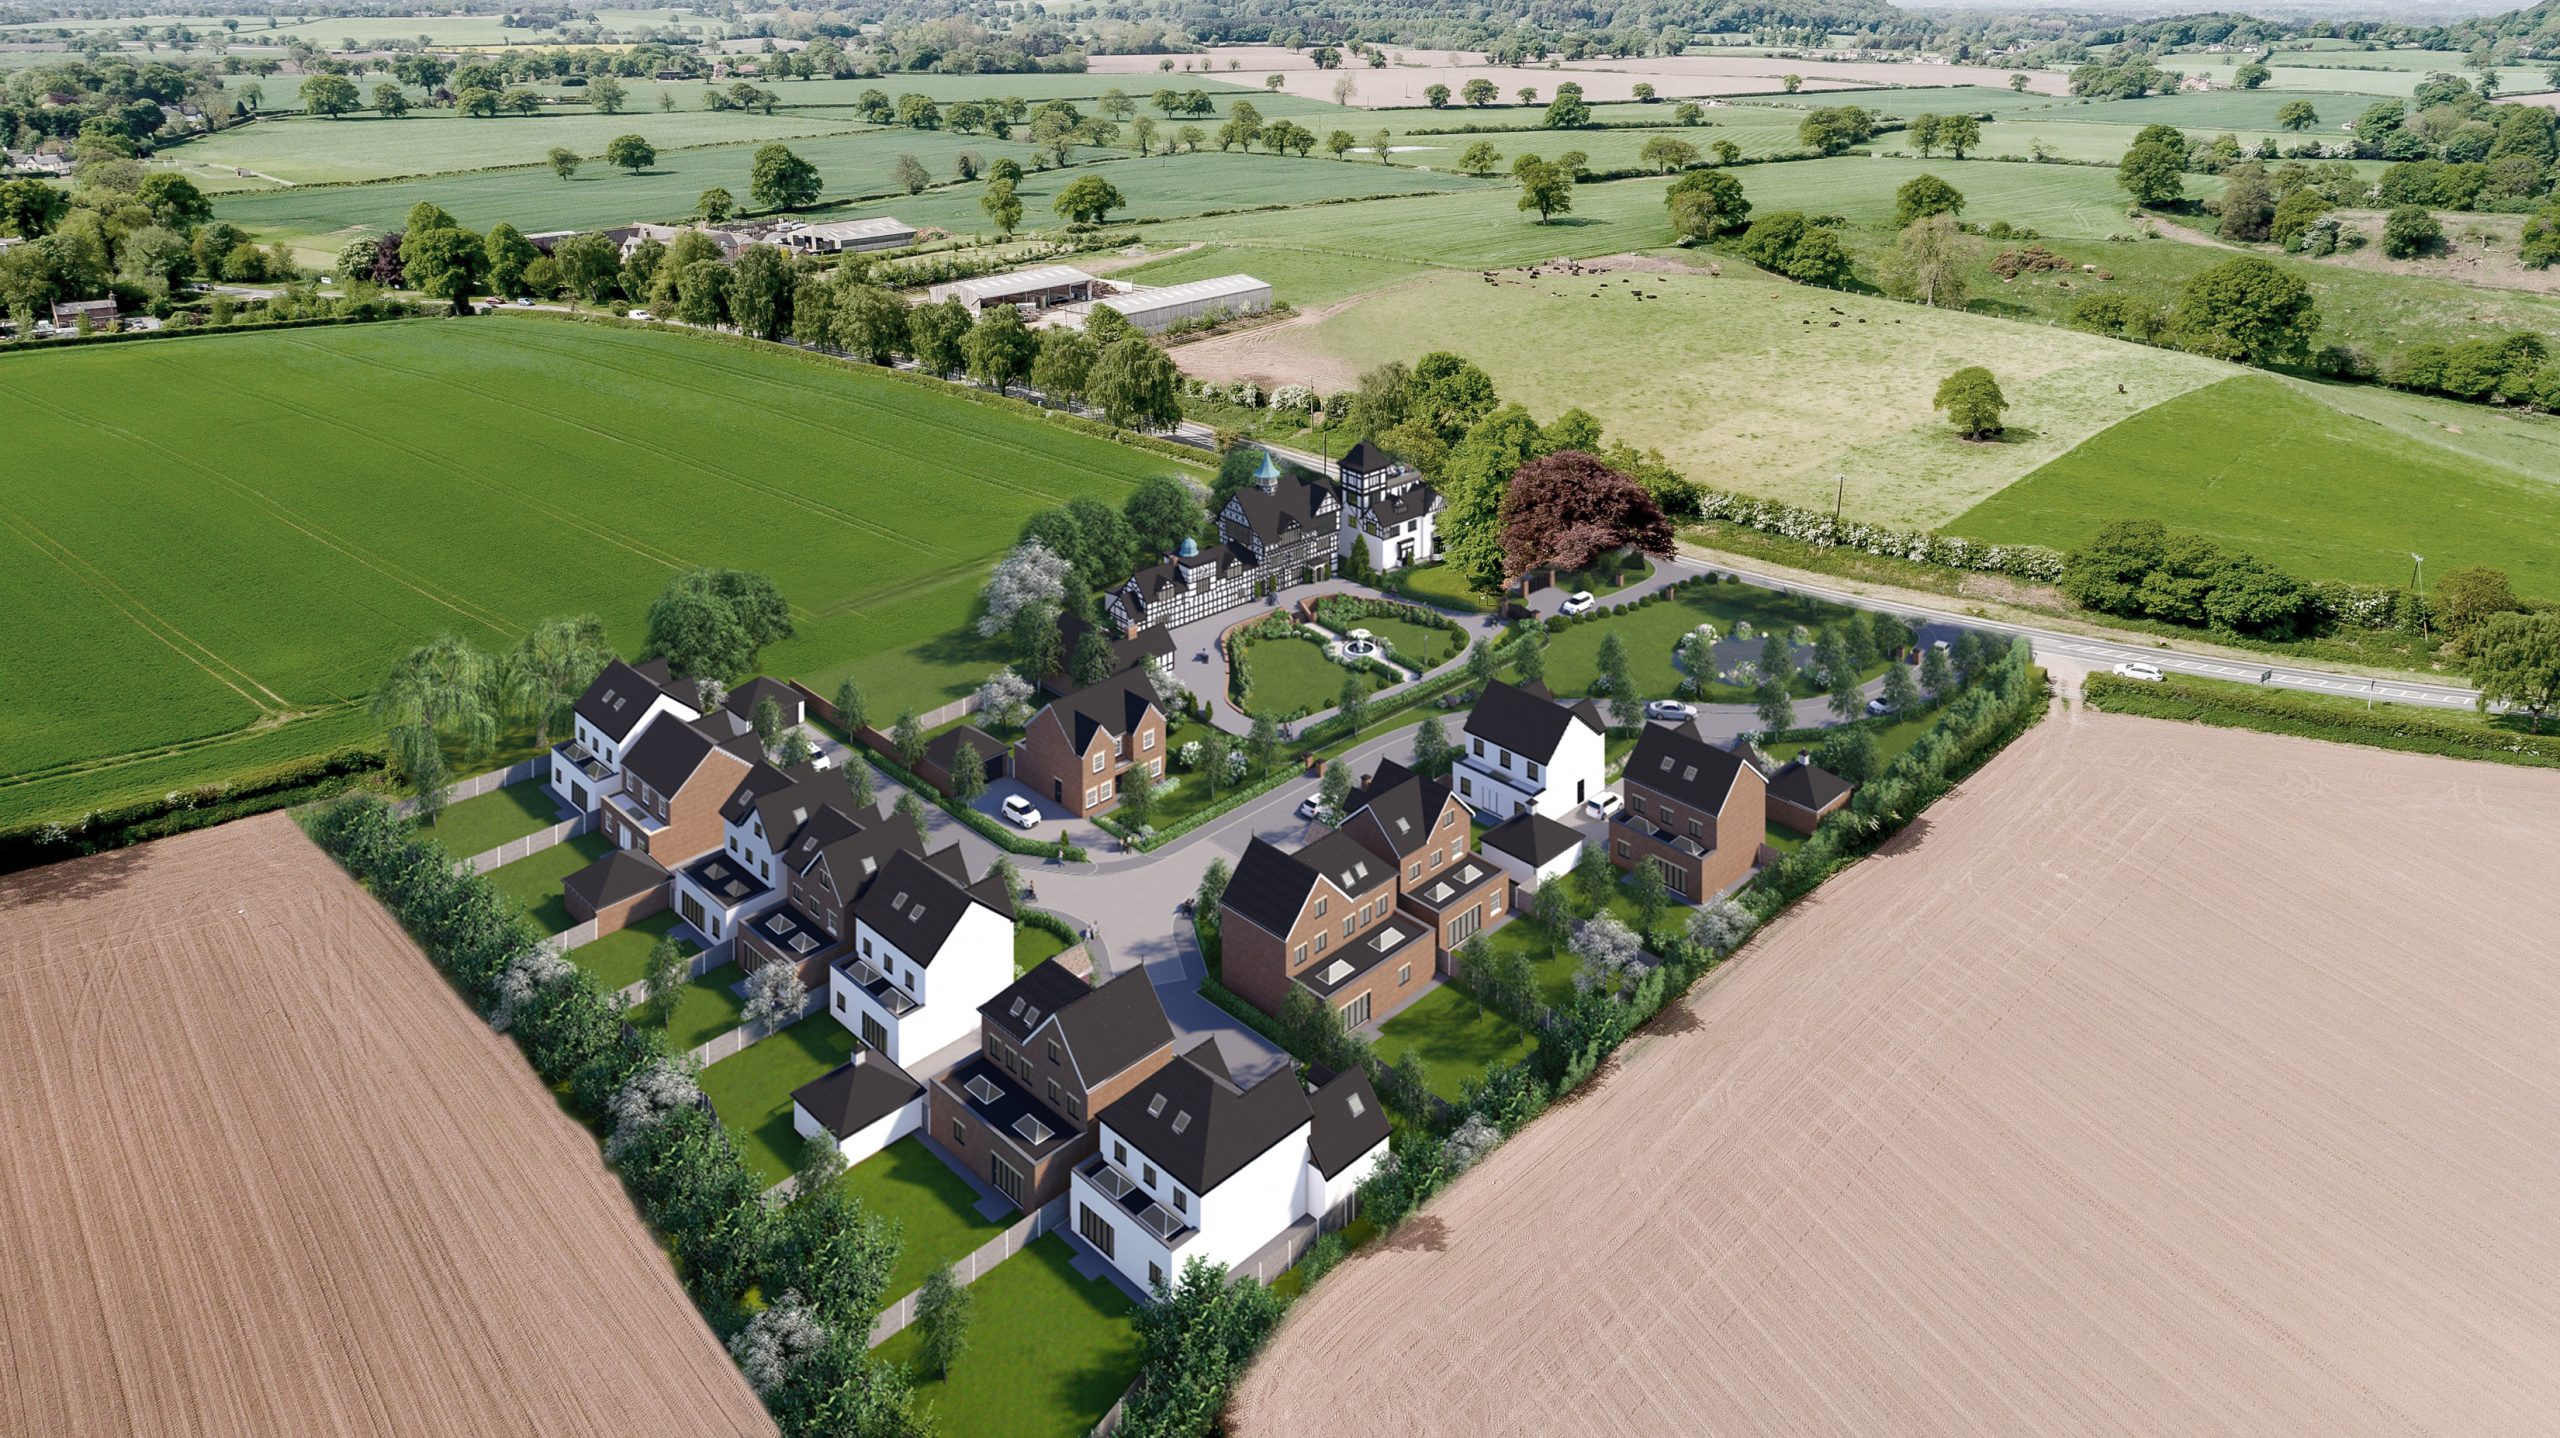 TABLEY HOMES SUBMITS PLANS TO REDEVELOP TARPORLEY’S FORMER WILD BOAR INN